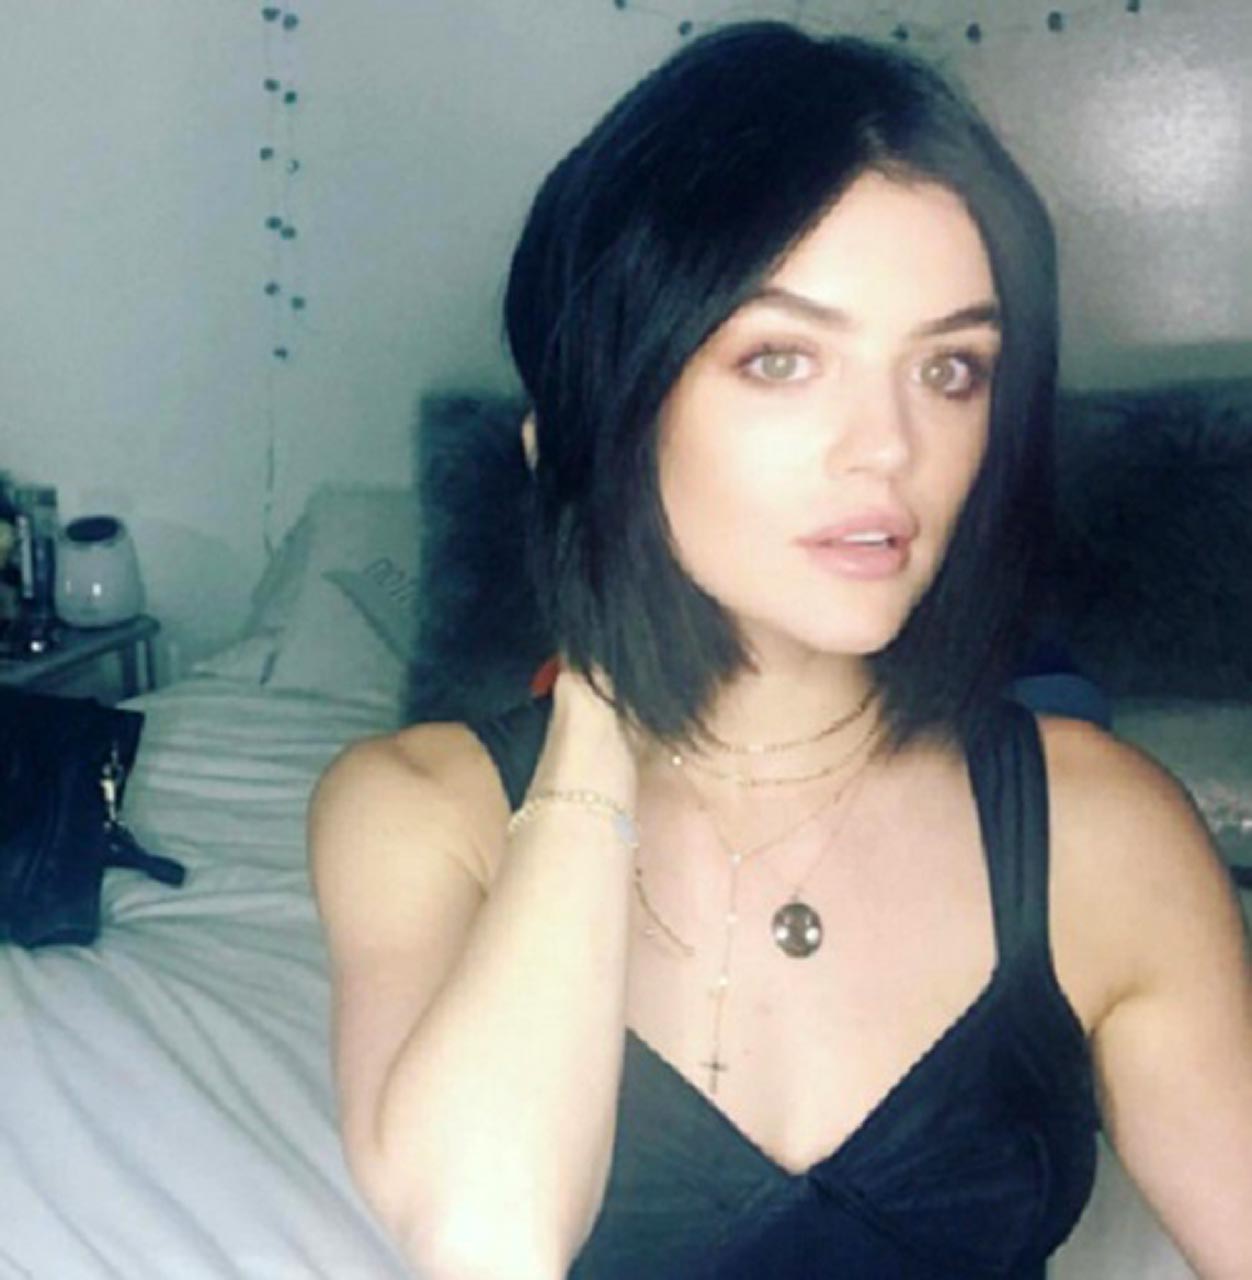 Pretty Little Liars Leaked Porn - Lucy Hale Leaked Nudes And Private Selfies â€” Topless Pretty Little Liars  Star Scandal Planet | Free Hot Nude Porn Pic Gallery